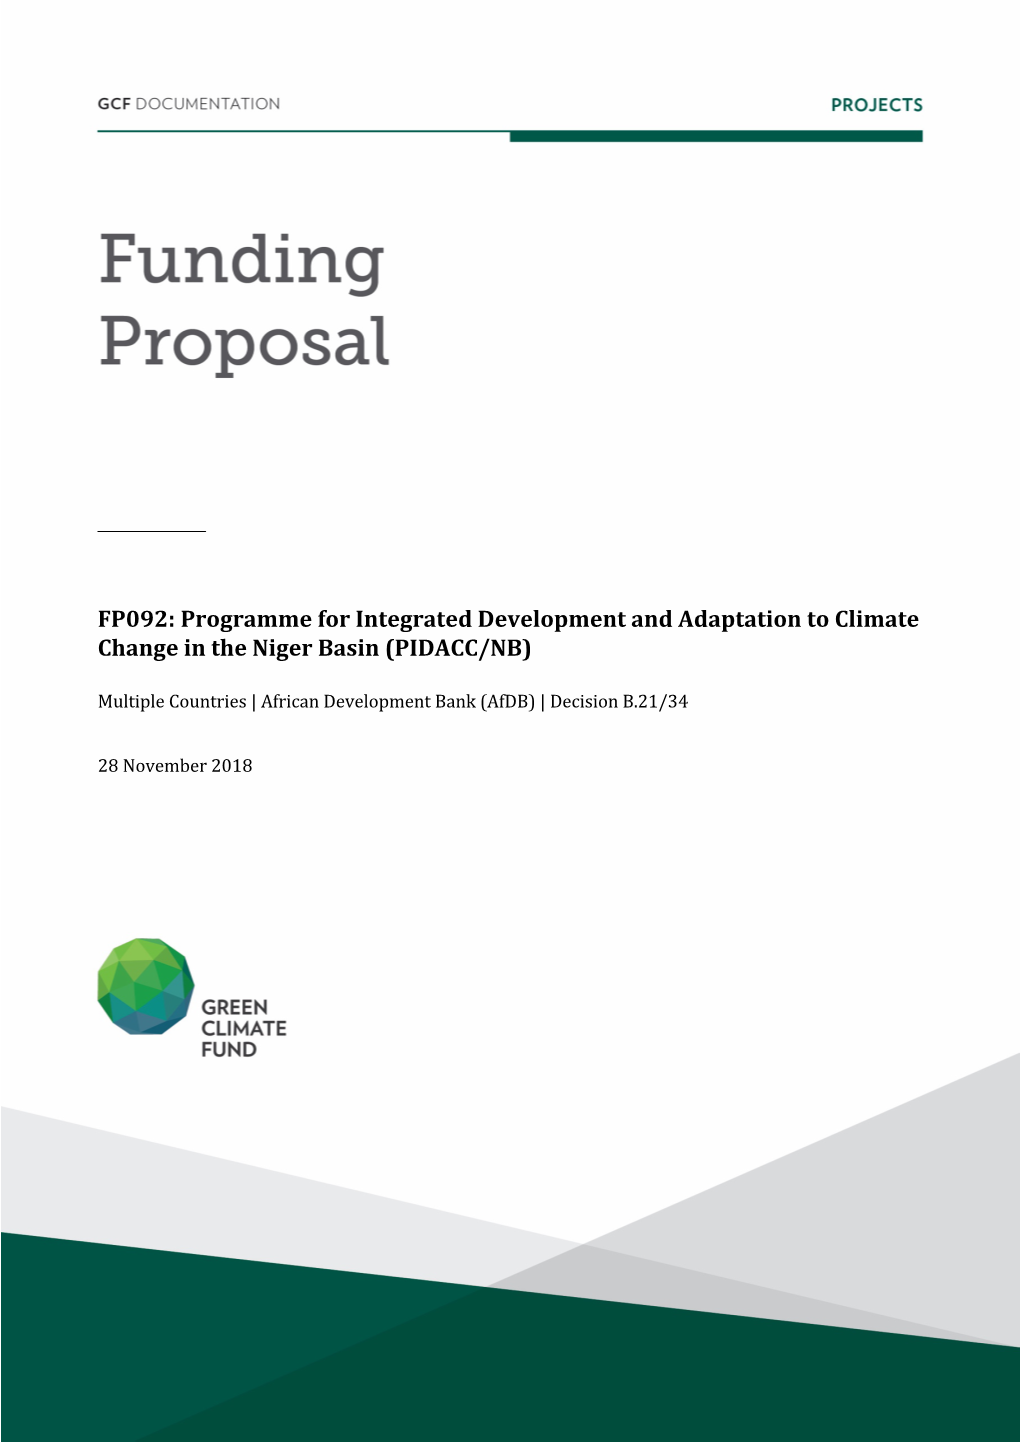 FP092: Programme for Integrated Development and Adaptation to Climate Change in the Niger Basin (PIDACC/NB)